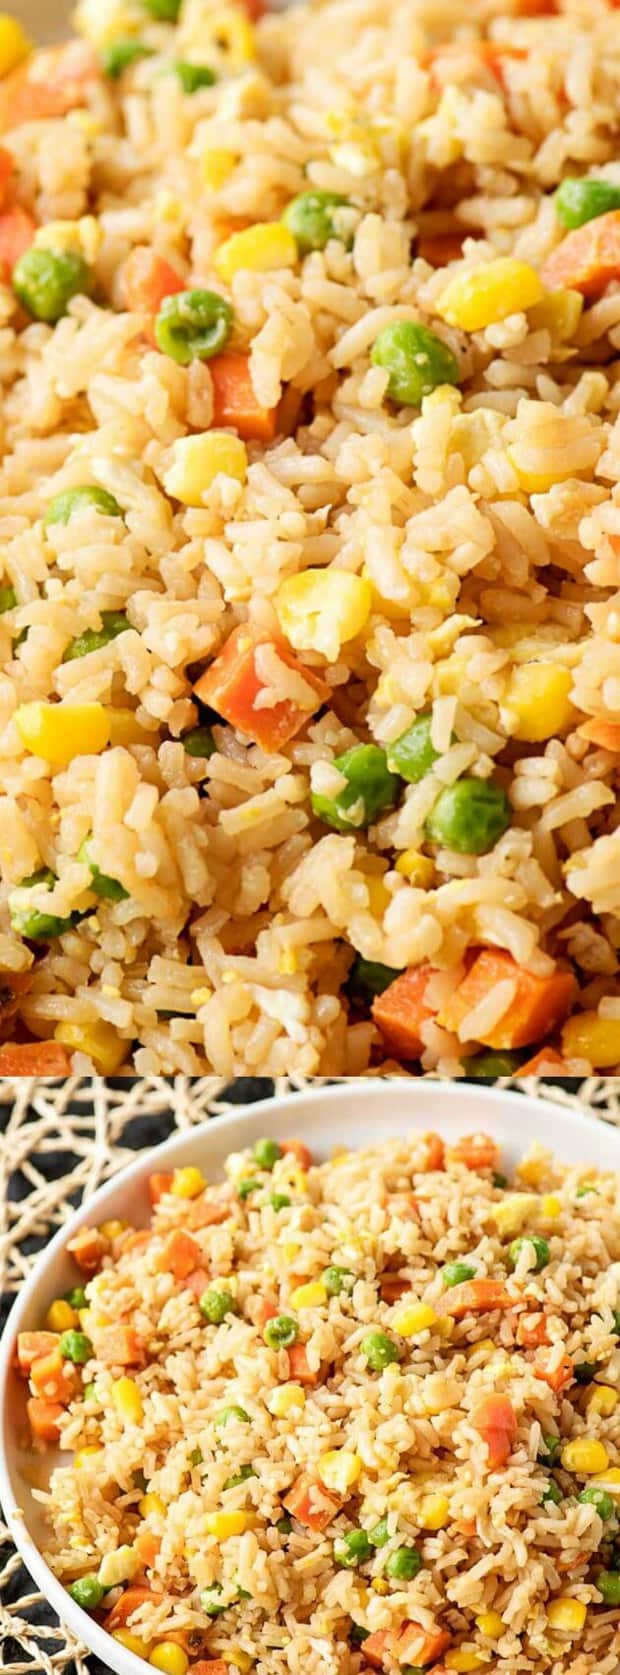 10 Minute Fried Rice - The Bets Blog Recipes